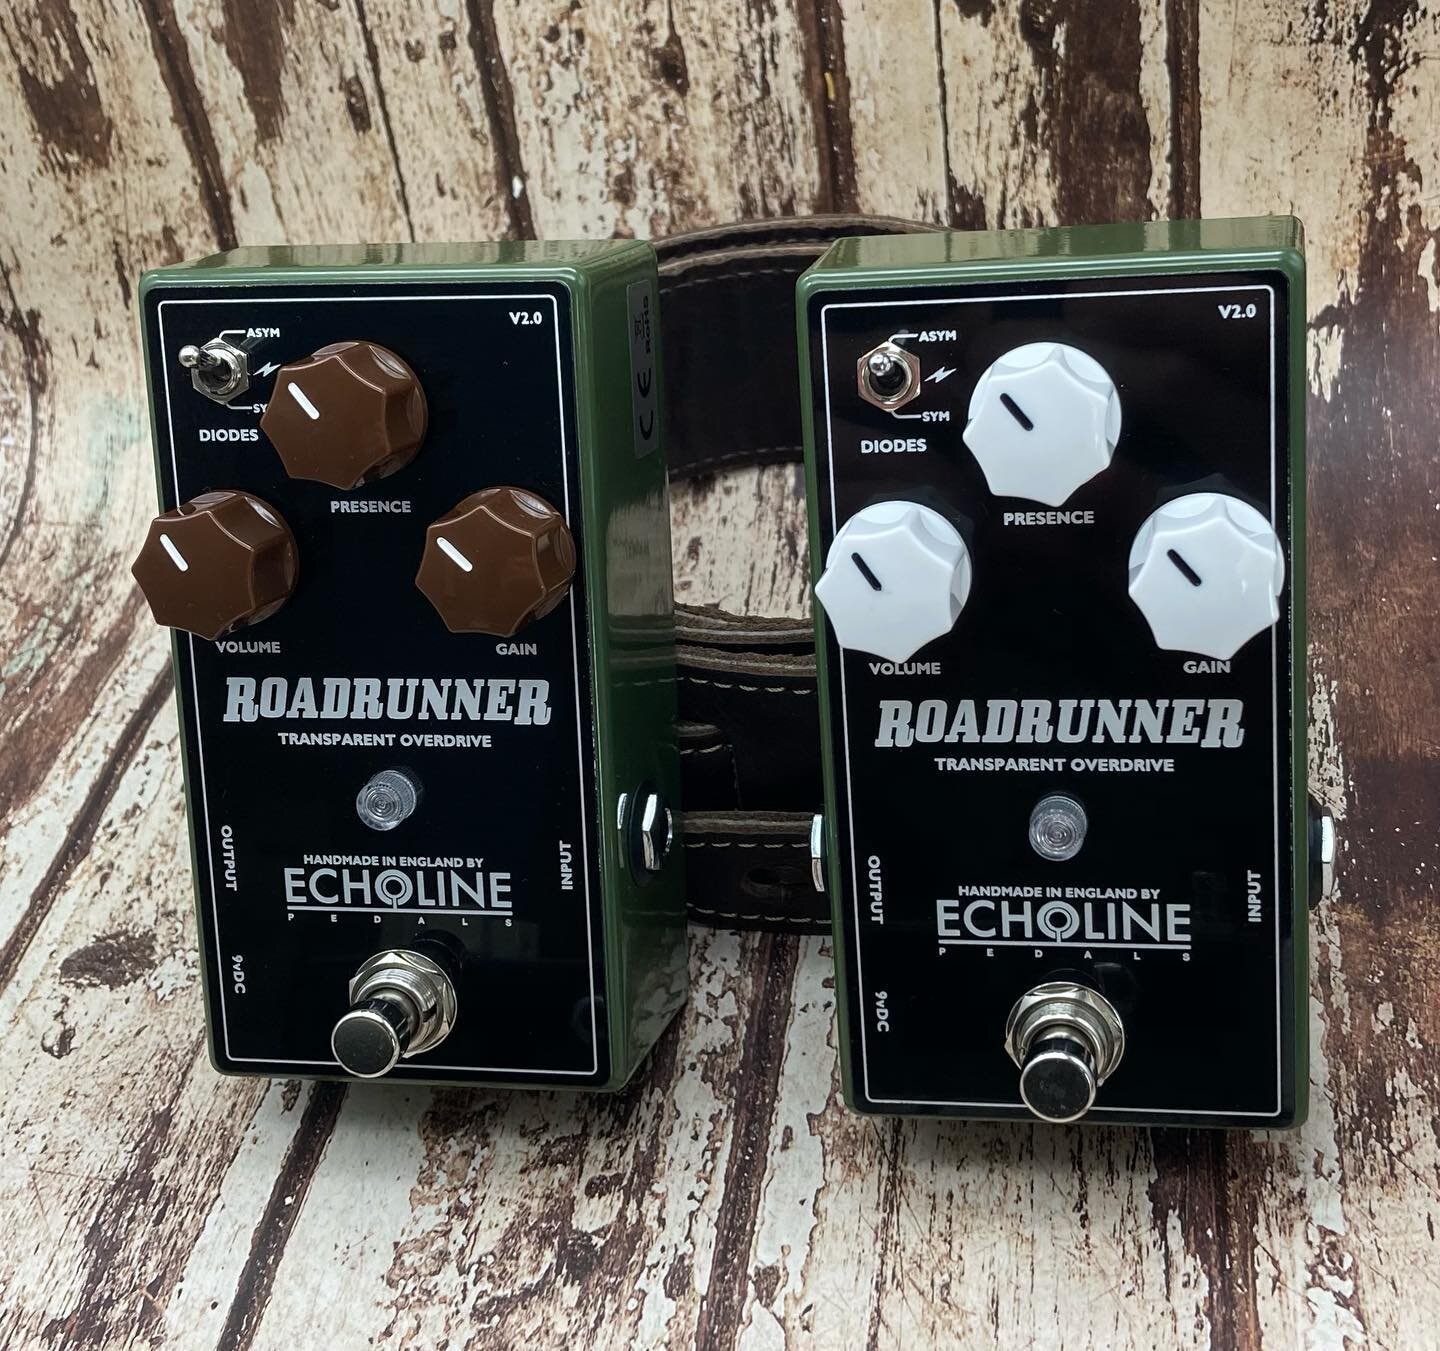 Flashback to the super limited &lsquo;Russian Roadrunner&rsquo; pair that we made!

NOS parts galore in these... we have enough left to make a few more and then that&rsquo;s it forever.

#echoline #echolinepedals #roadrunner #guitarpedals #effectsped